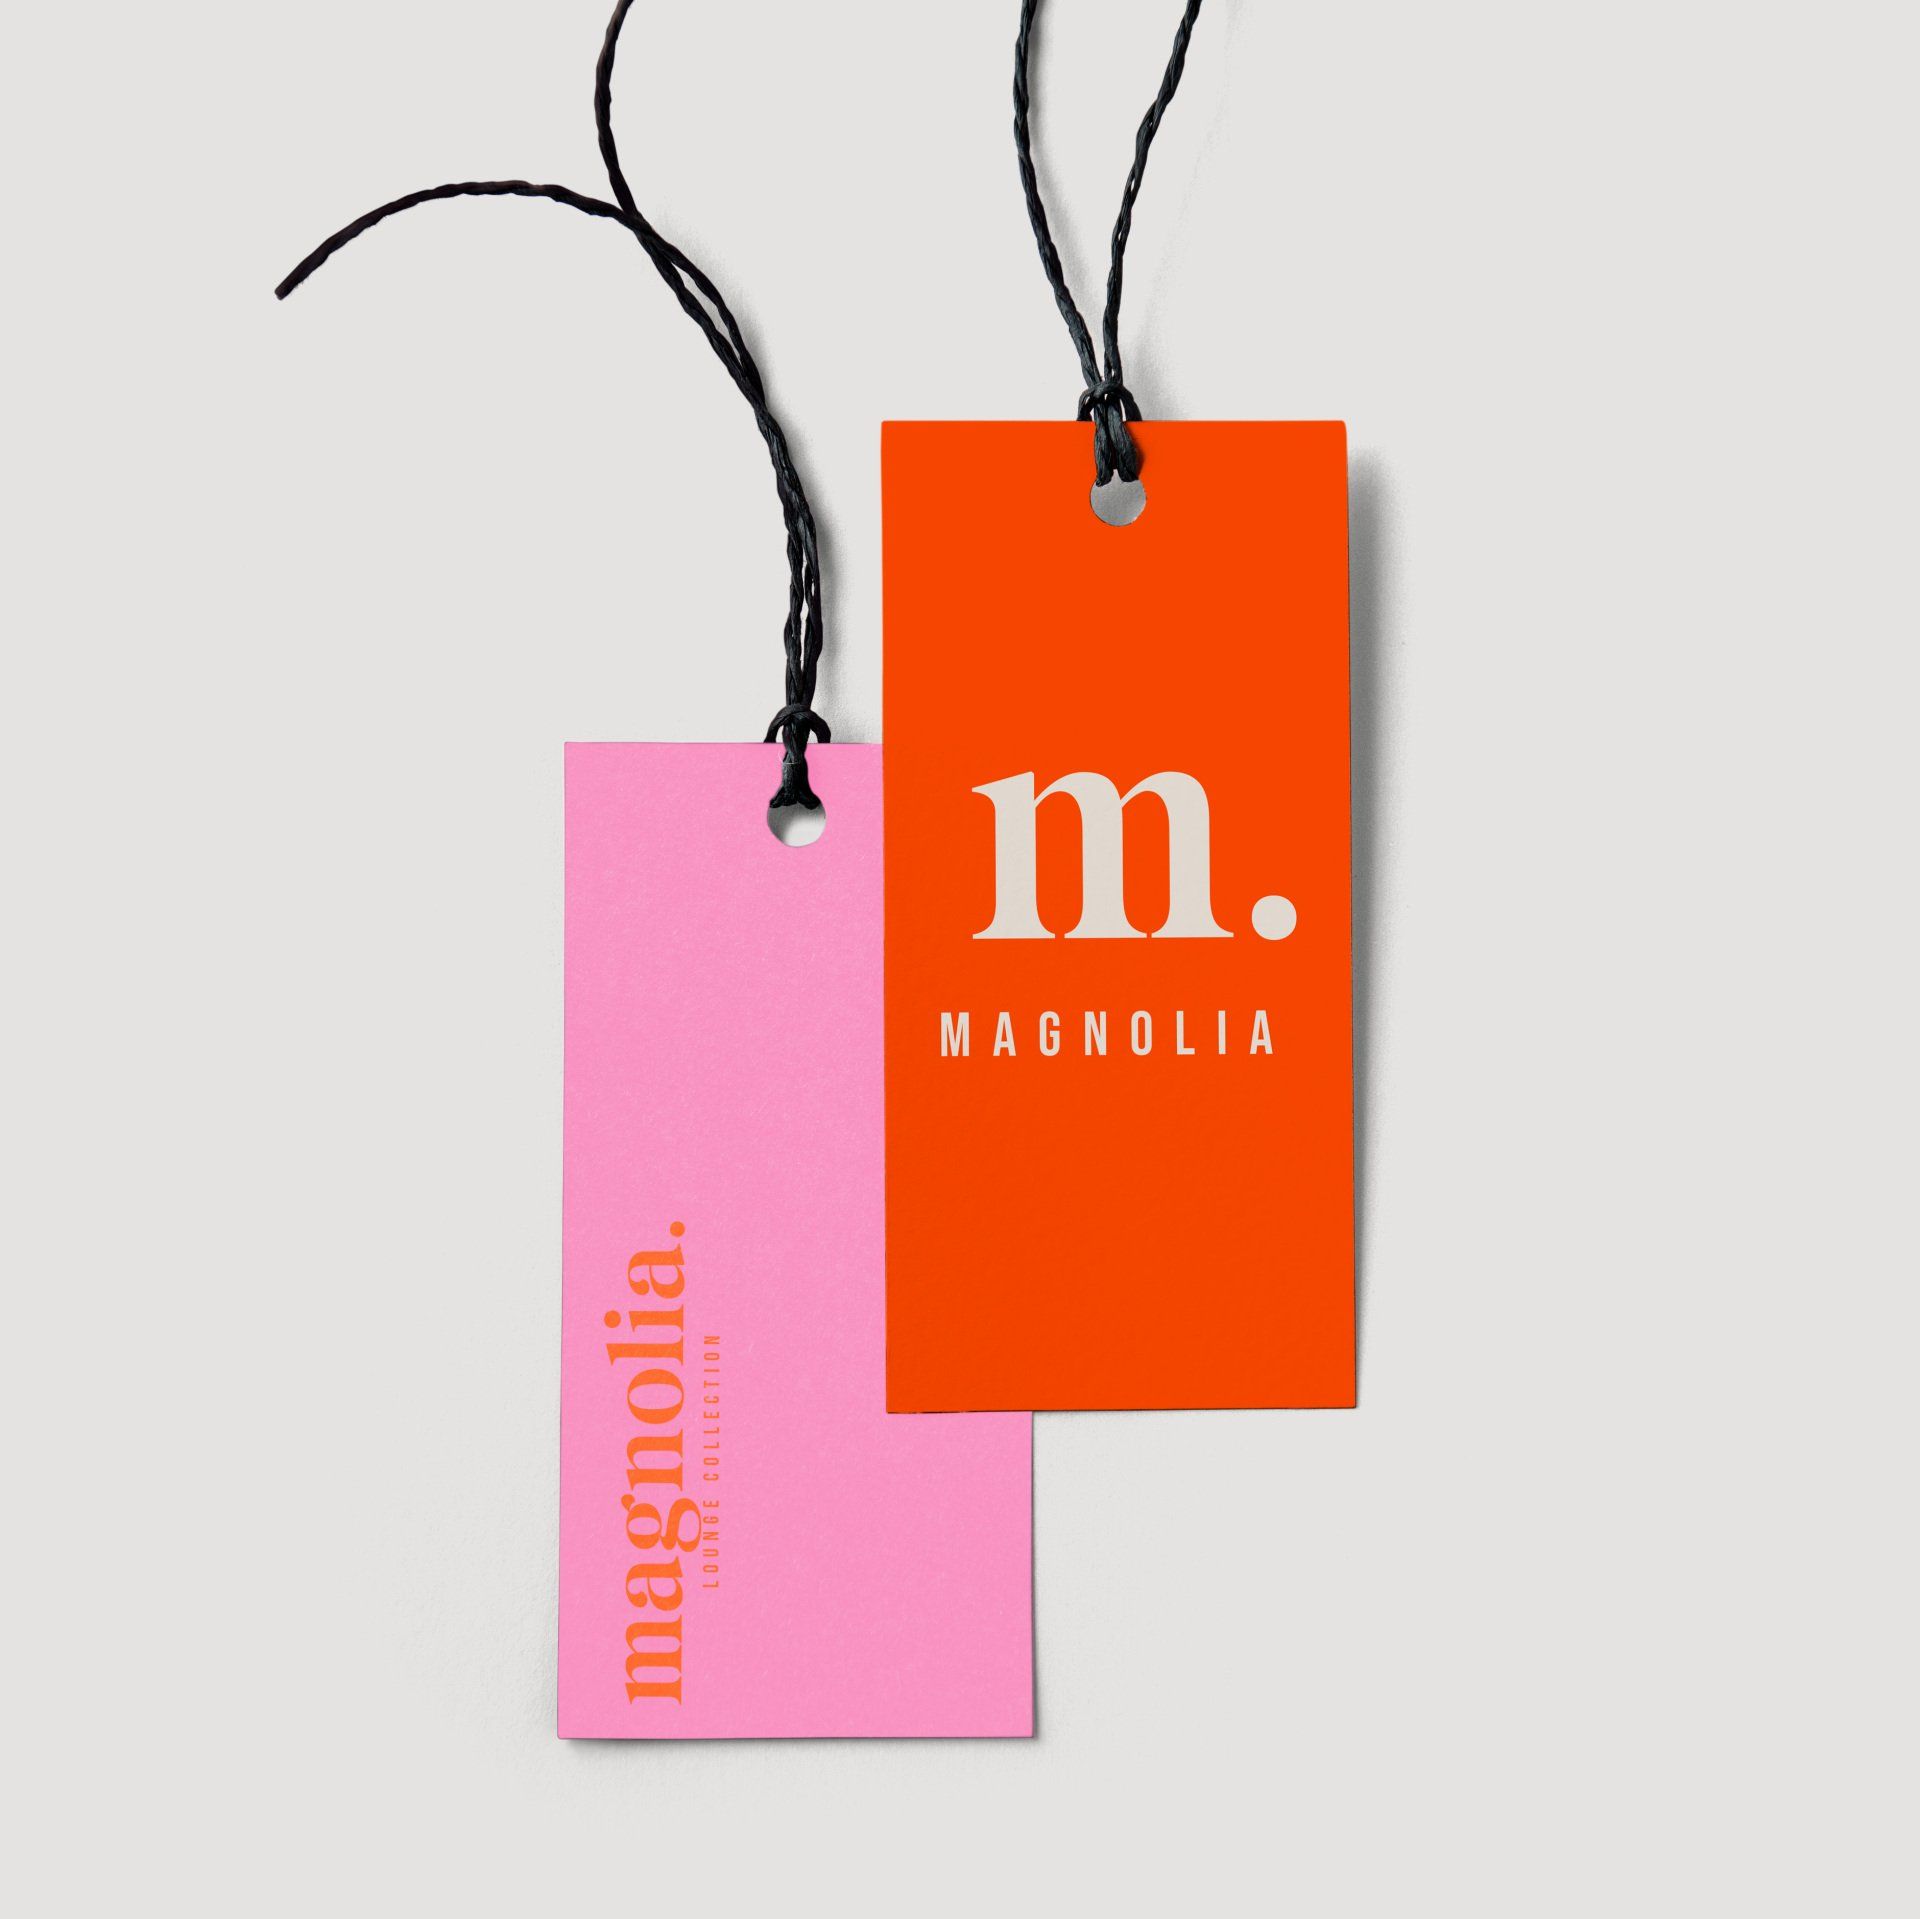 A pink and orange tag that says magnolia on it